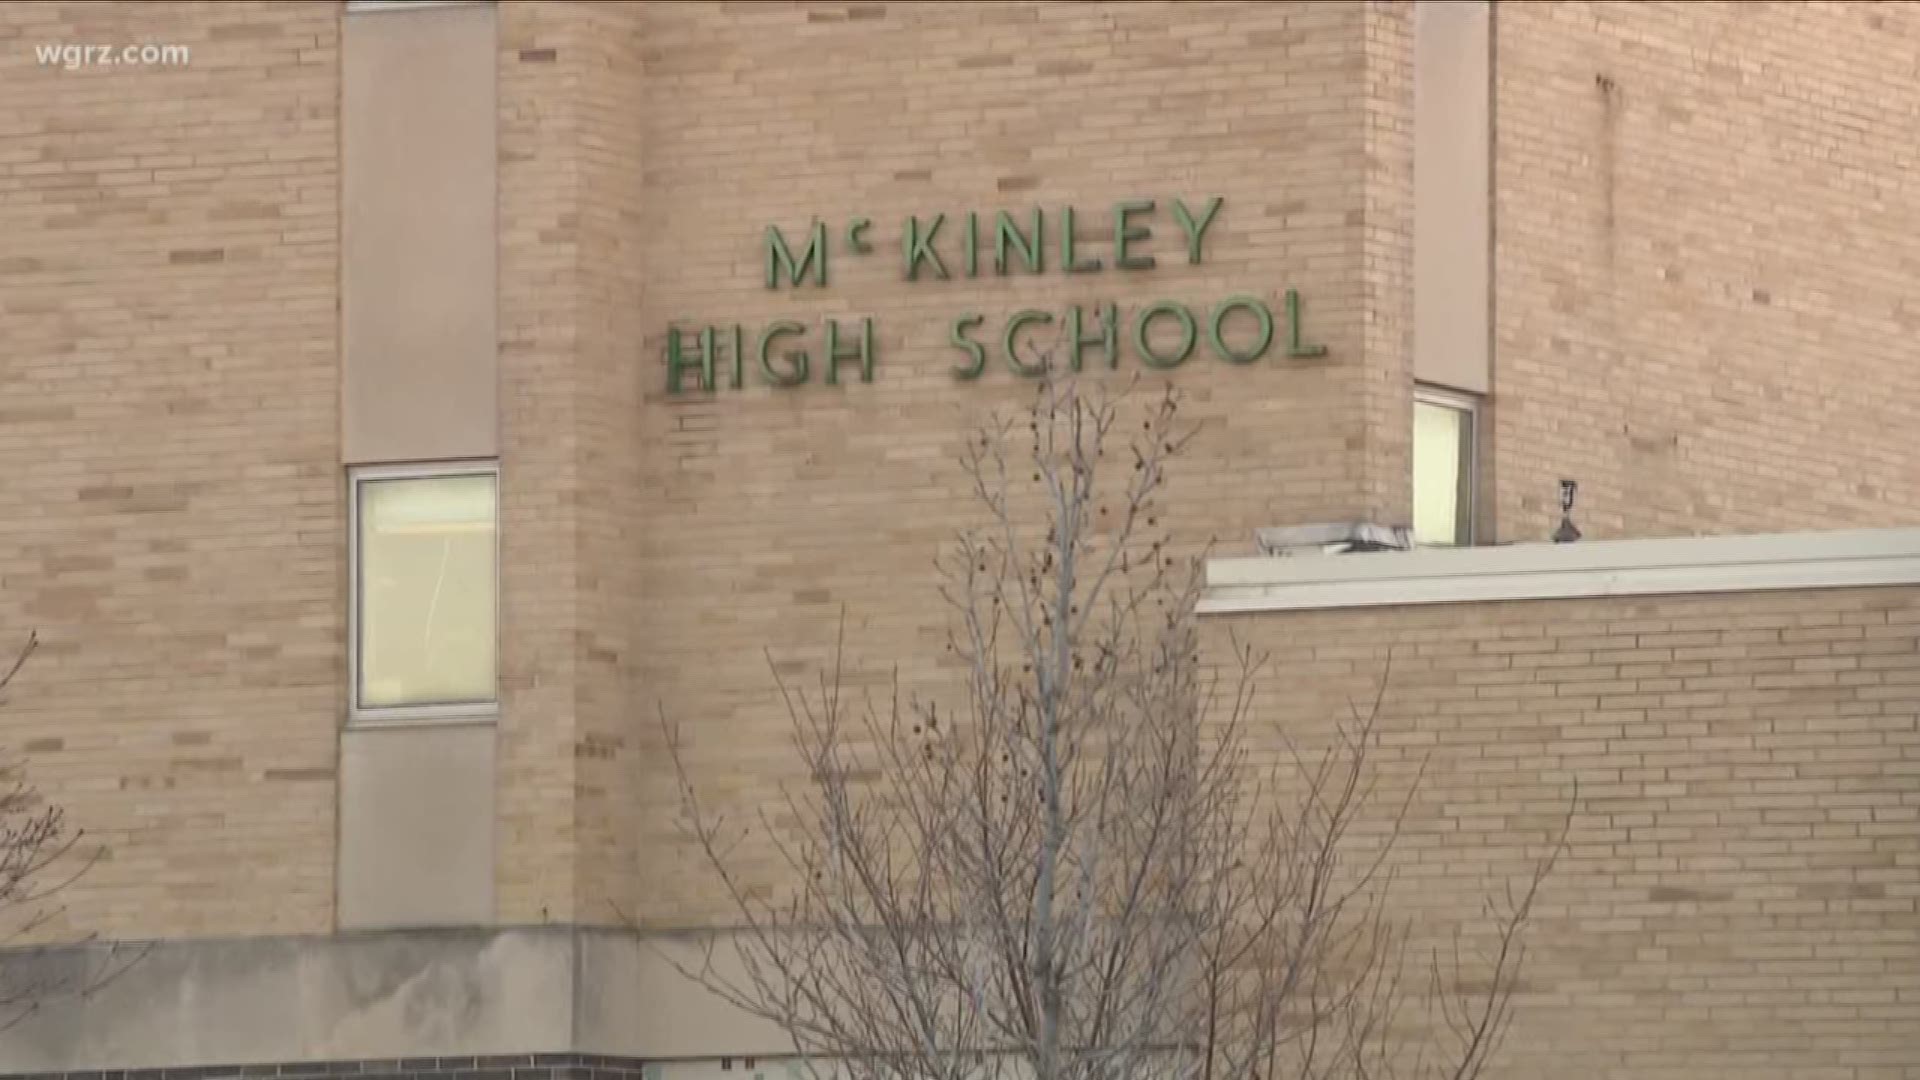 McKinley Students "We Apologize"